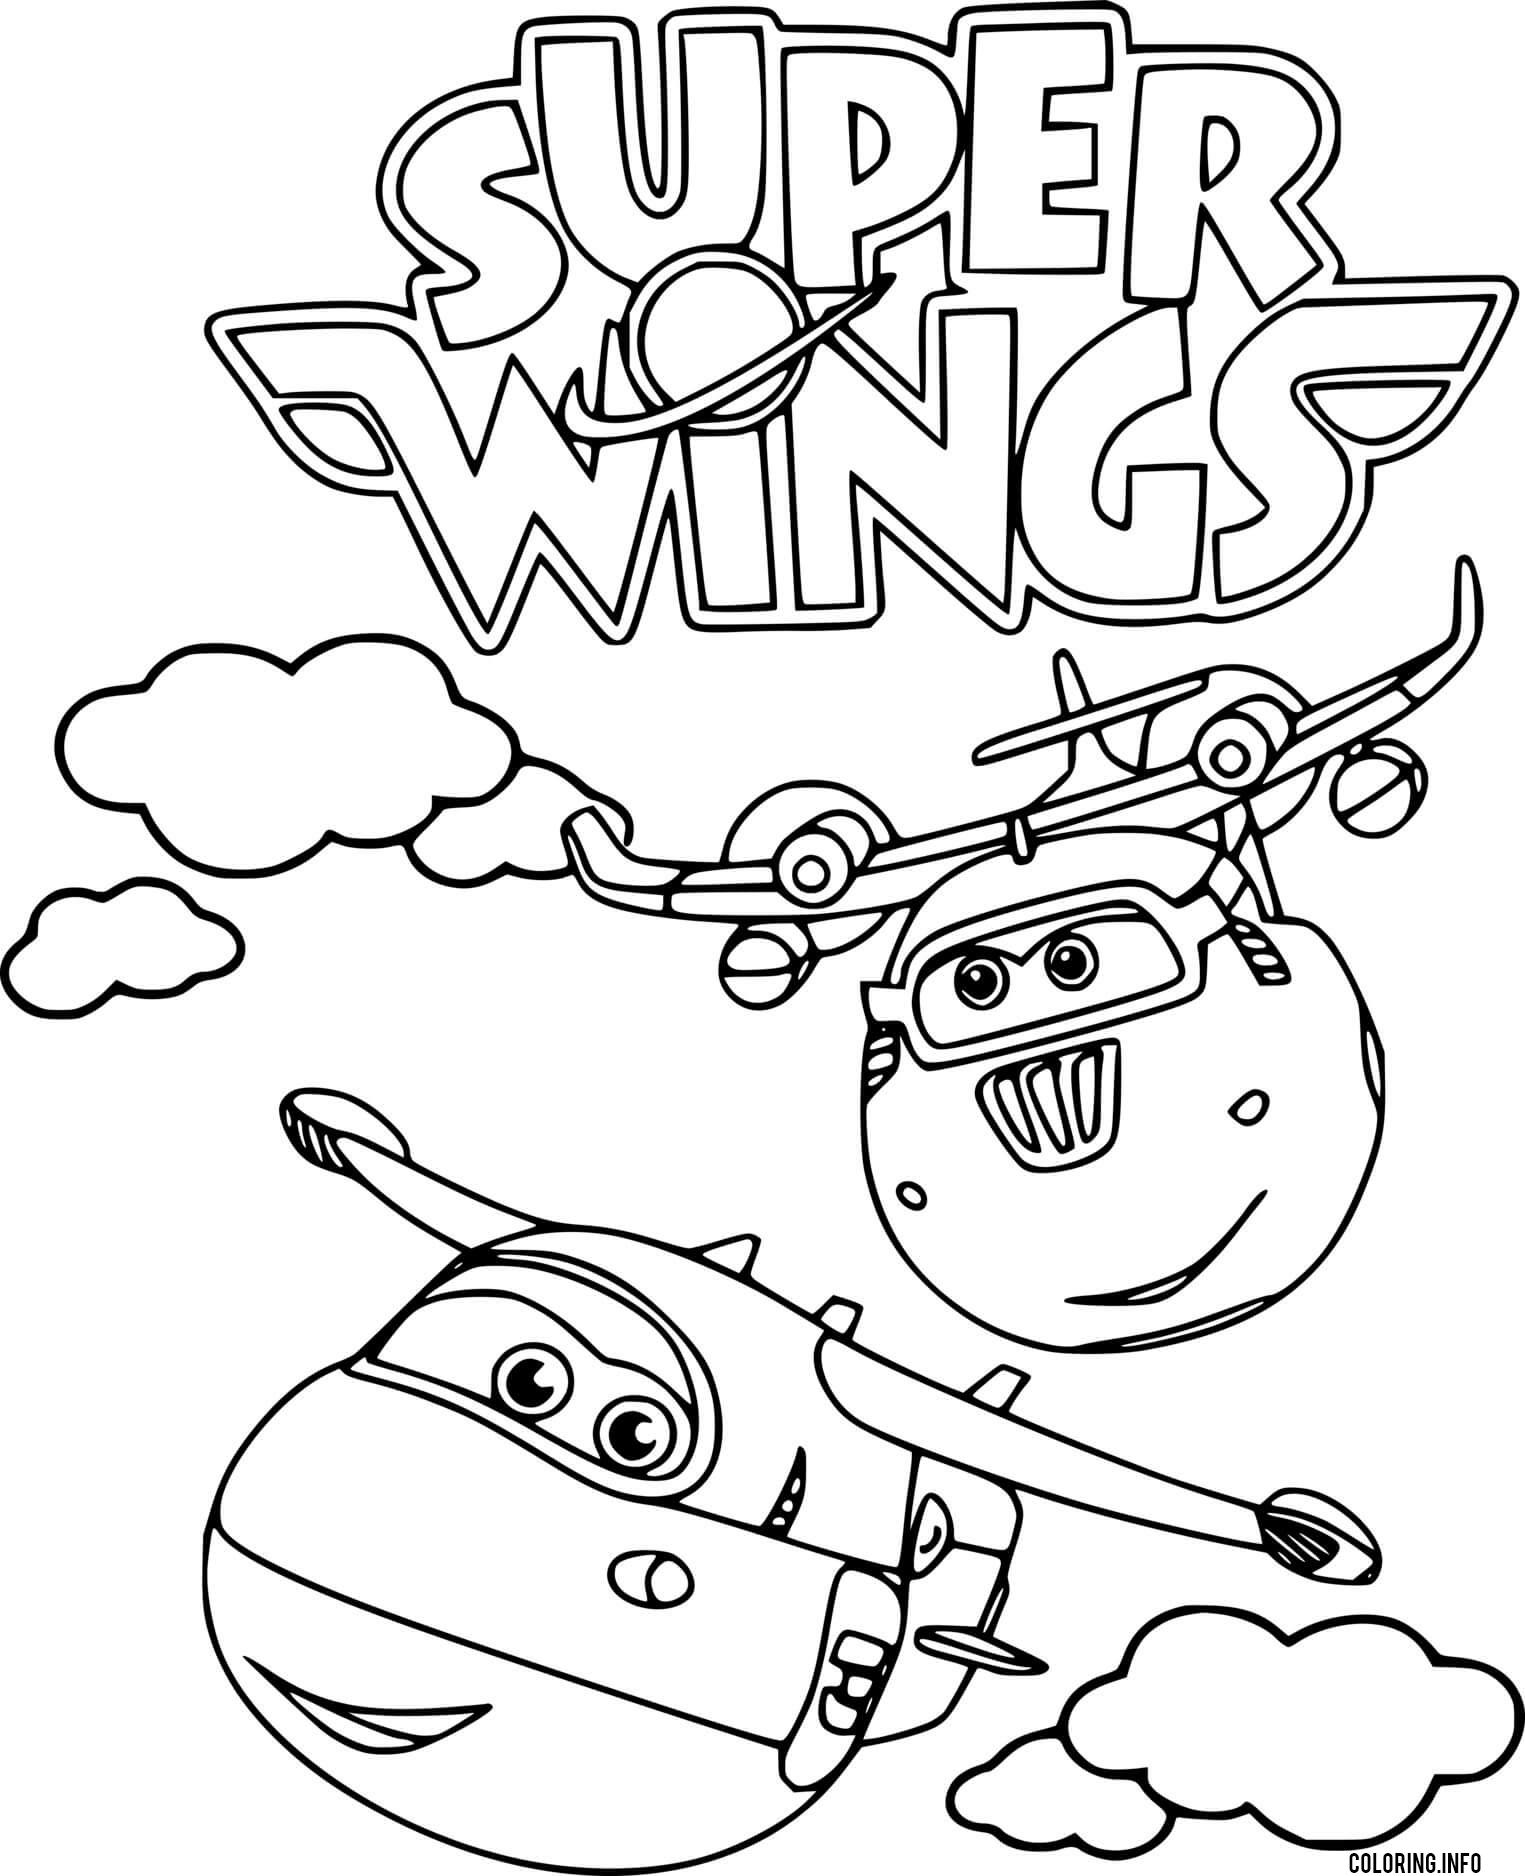 Airplanes From Super Wings coloring